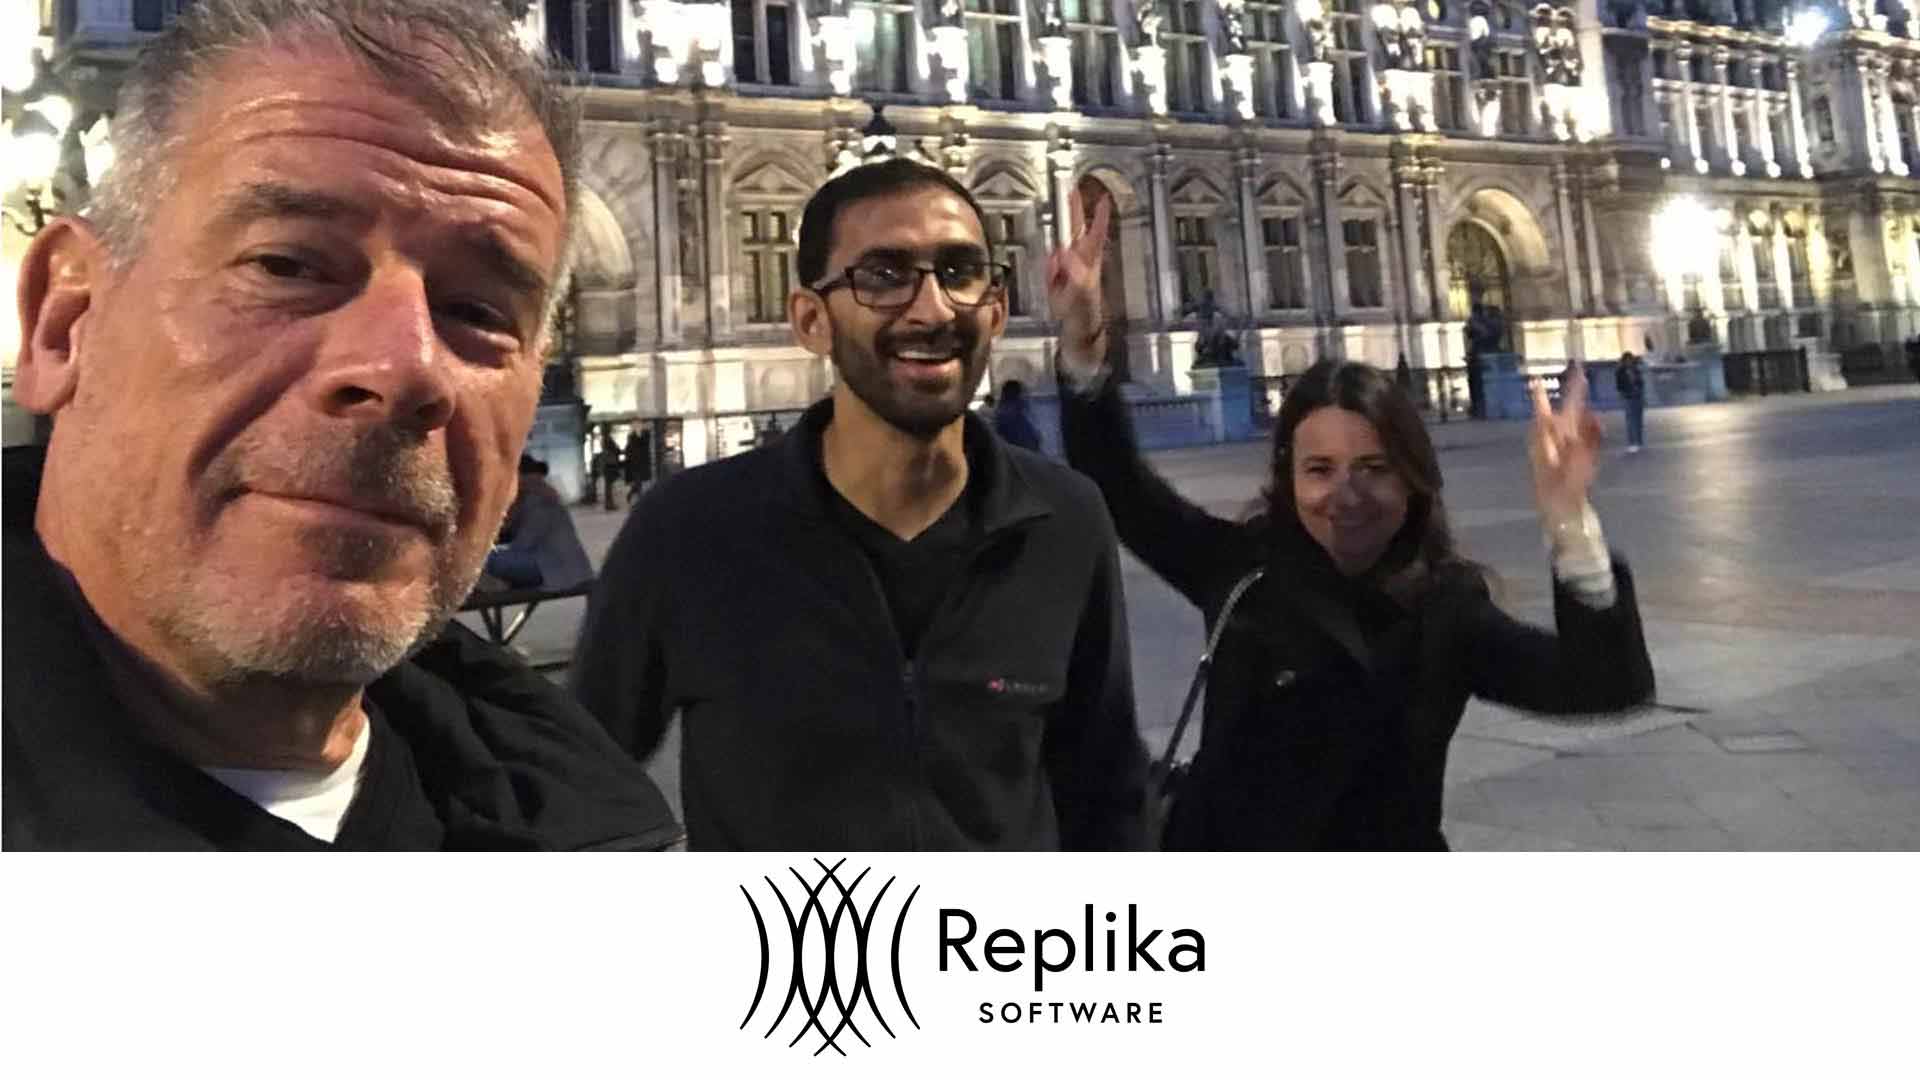 Replika Software: A new technology dedicated to humanizing online shopping